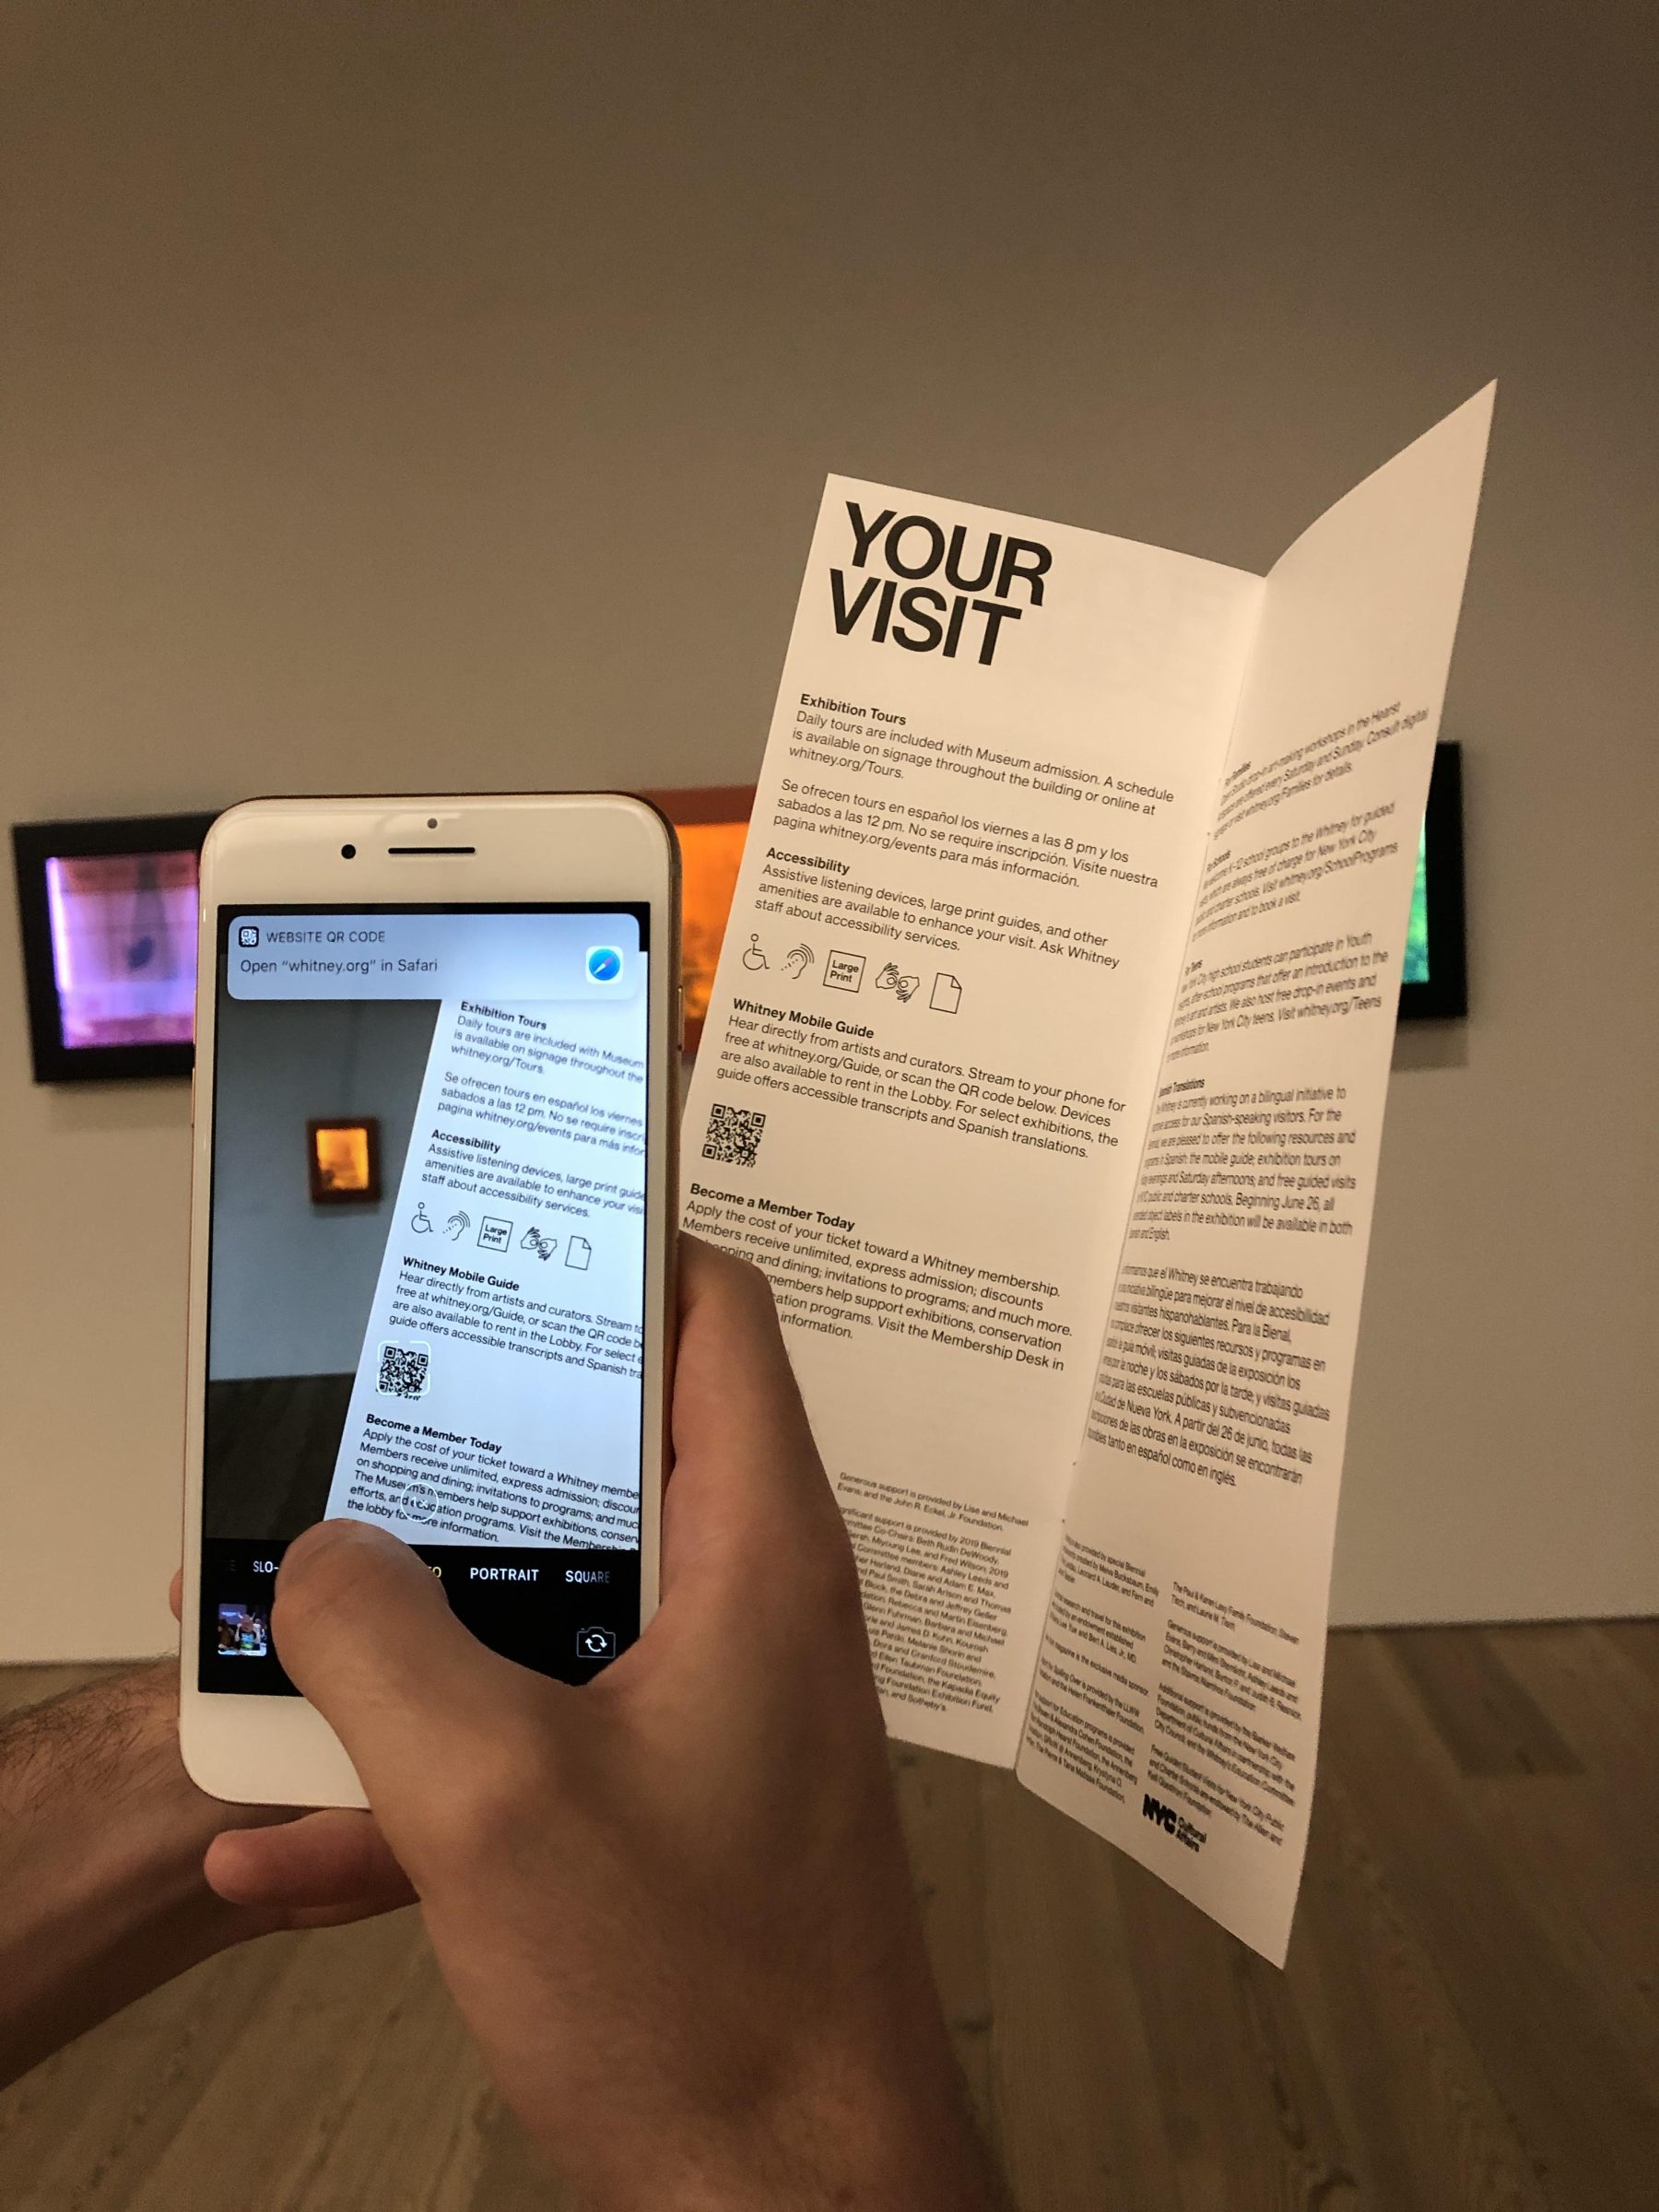 An iPhone with the camera app open held up to scan a QR code on a paper museum guide.